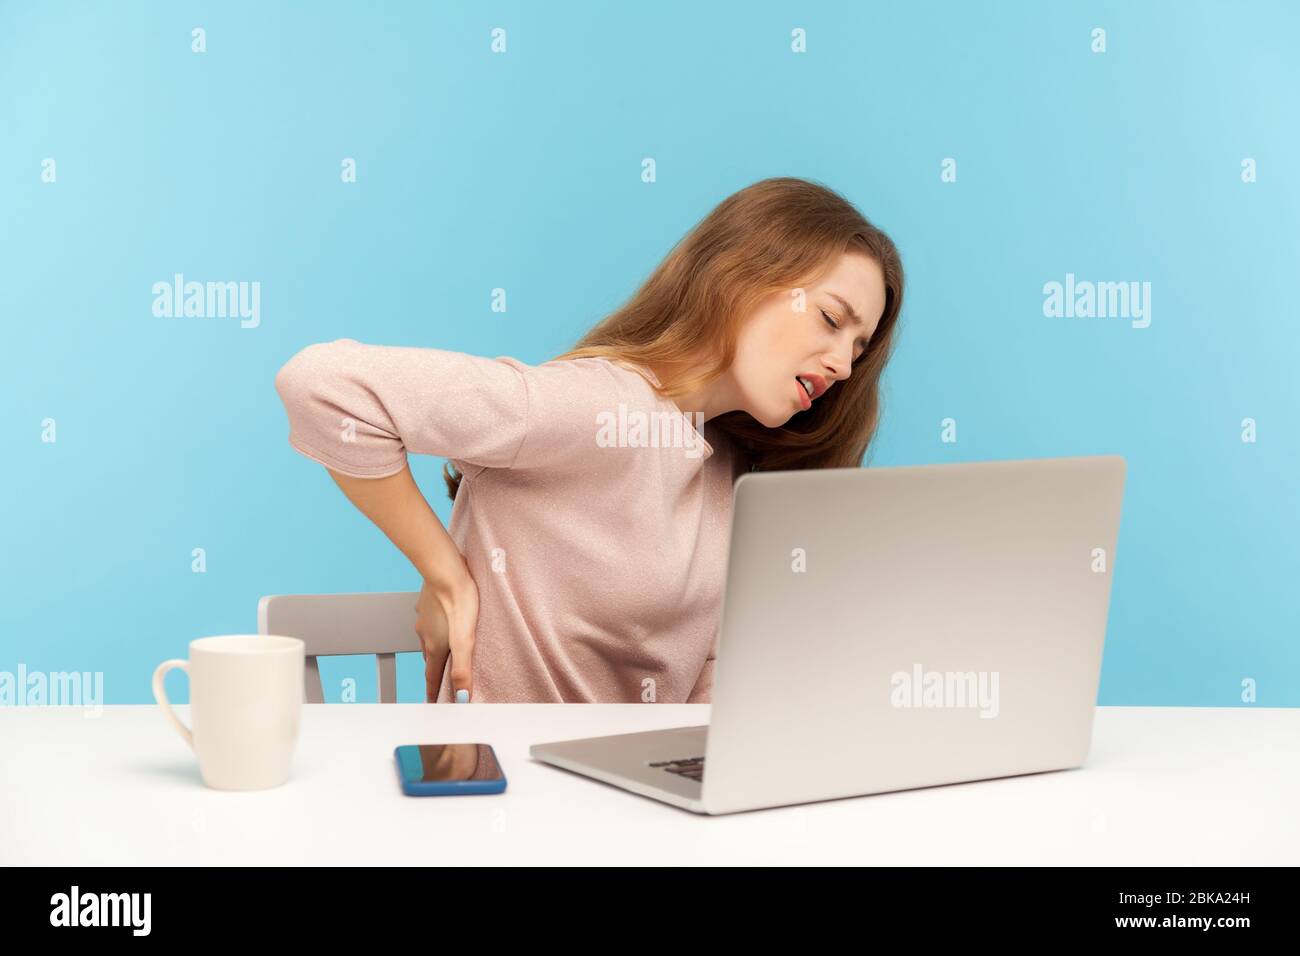 Fatigued unhealthy woman, office employee, sitting at workplace feeling unwell with sore back, hurting stiff muscles and spasms from sedentary lifesty Stock Photo